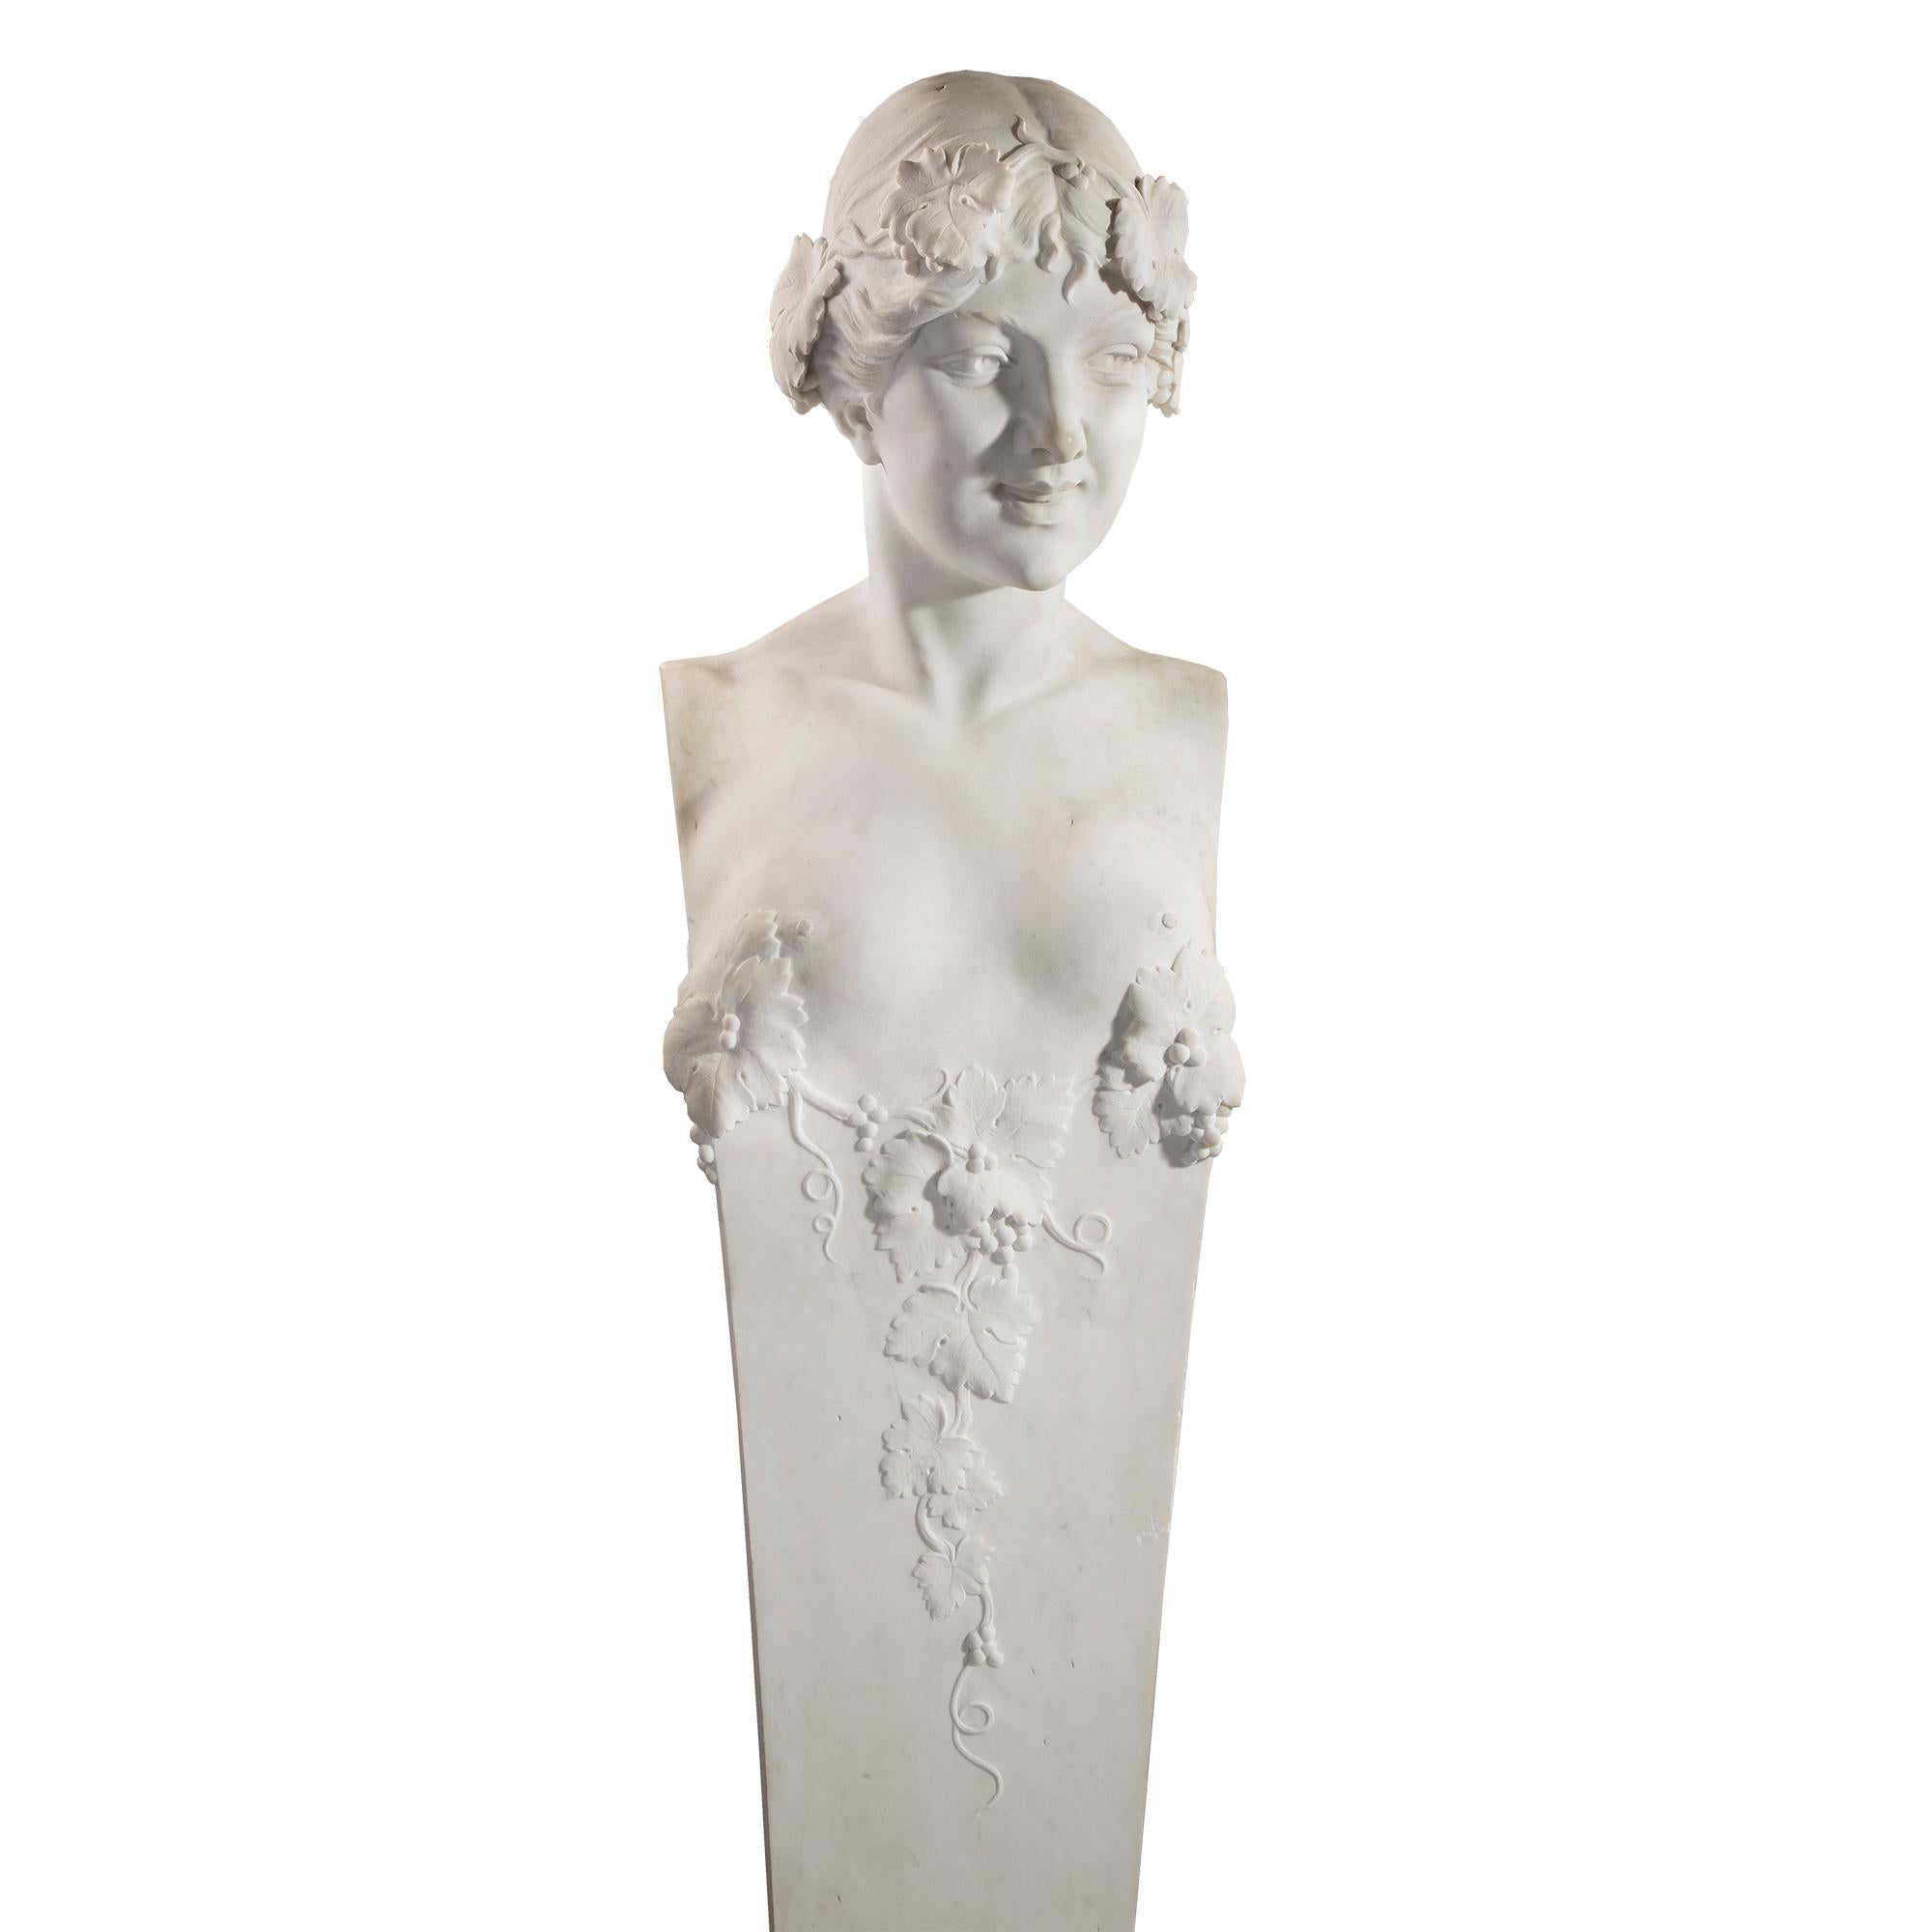 An impressive and life-sized Italian 19th century solid white Carrara marble statuary of Pan and Maiden in the Garden. Each statue stands over six feet tall and is raised by a mottled square base tapering up as an elegant smooth finish to the